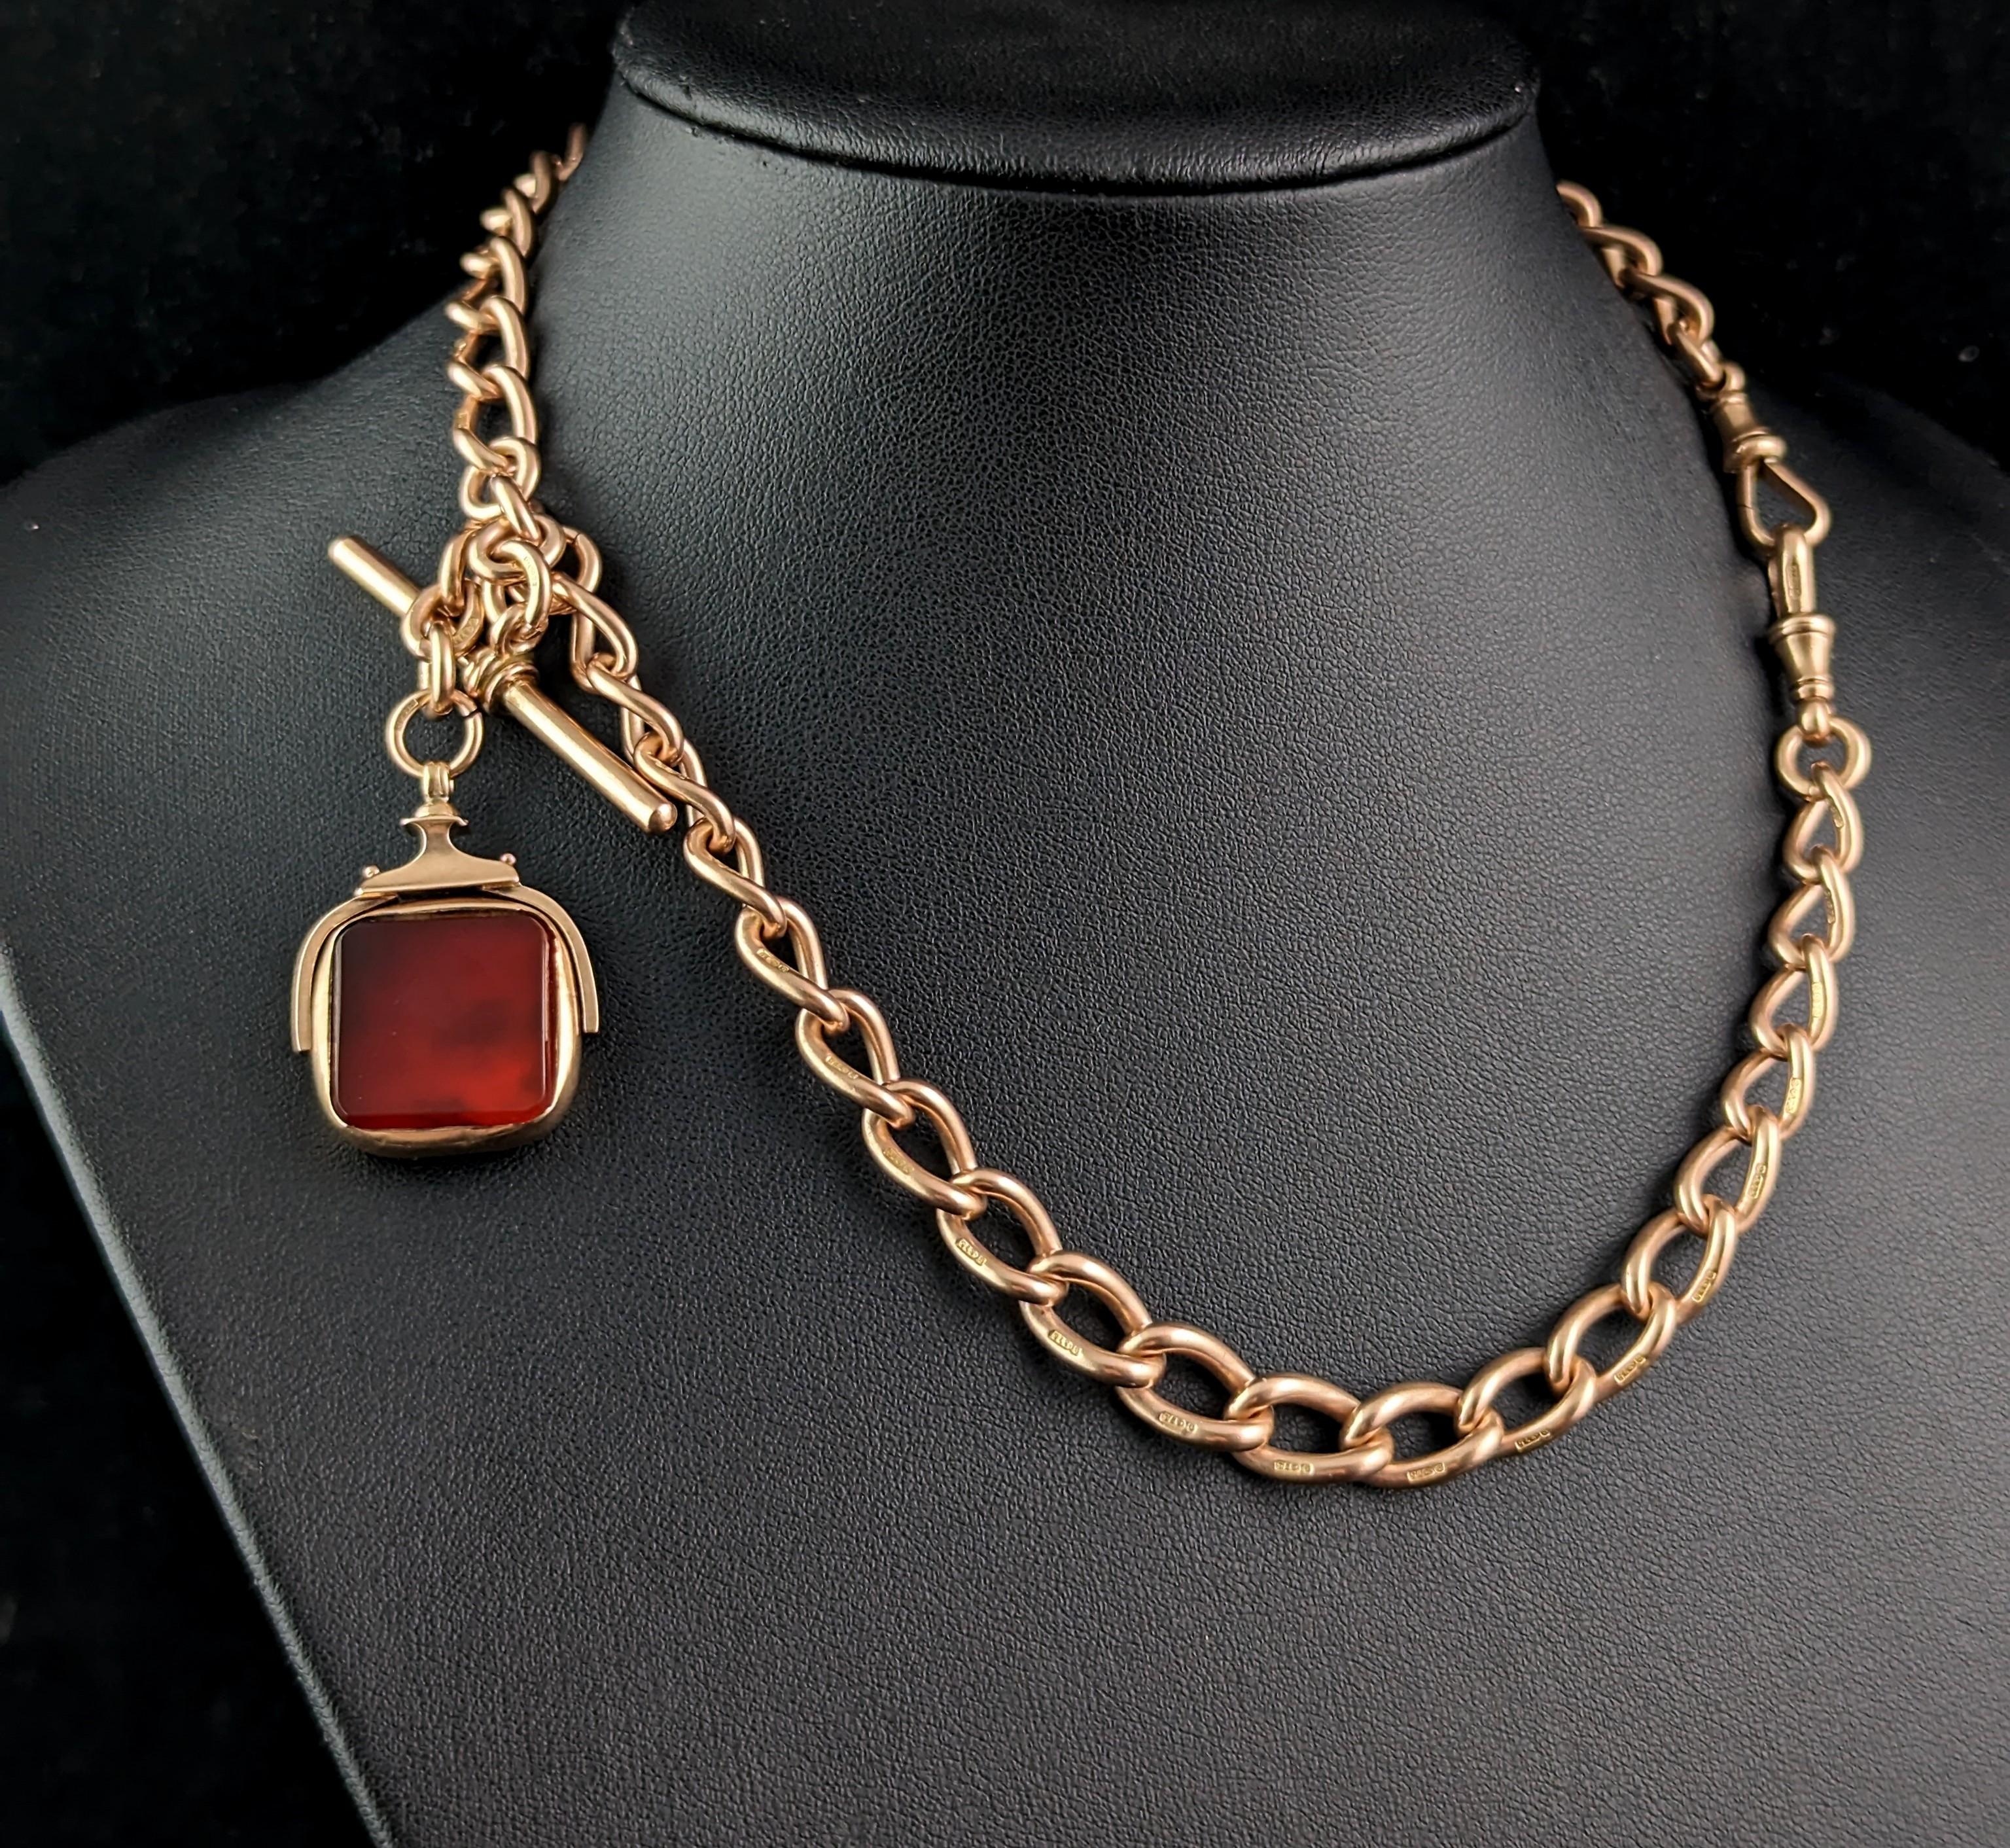 You can't go wrong with a gorgeous antique gold Albert chain, such a classic staple piece of antique jewellery and just so wearable!

This handsome antique chain has everything going for it, the look, the length and the weight, it even comes with an